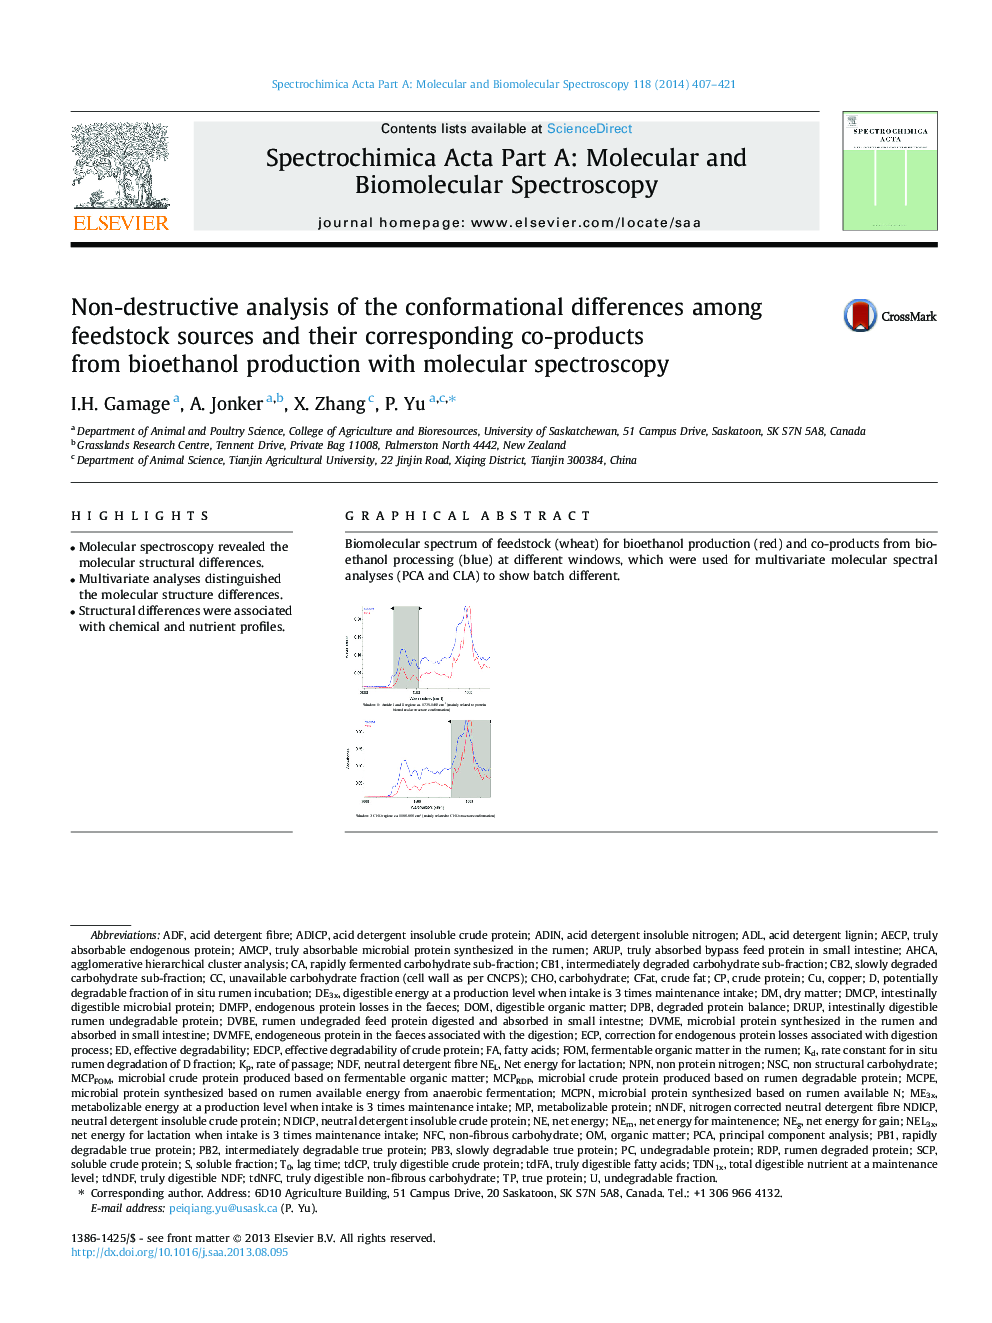 Non-destructive analysis of the conformational differences among feedstock sources and their corresponding co-products from bioethanol production with molecular spectroscopy